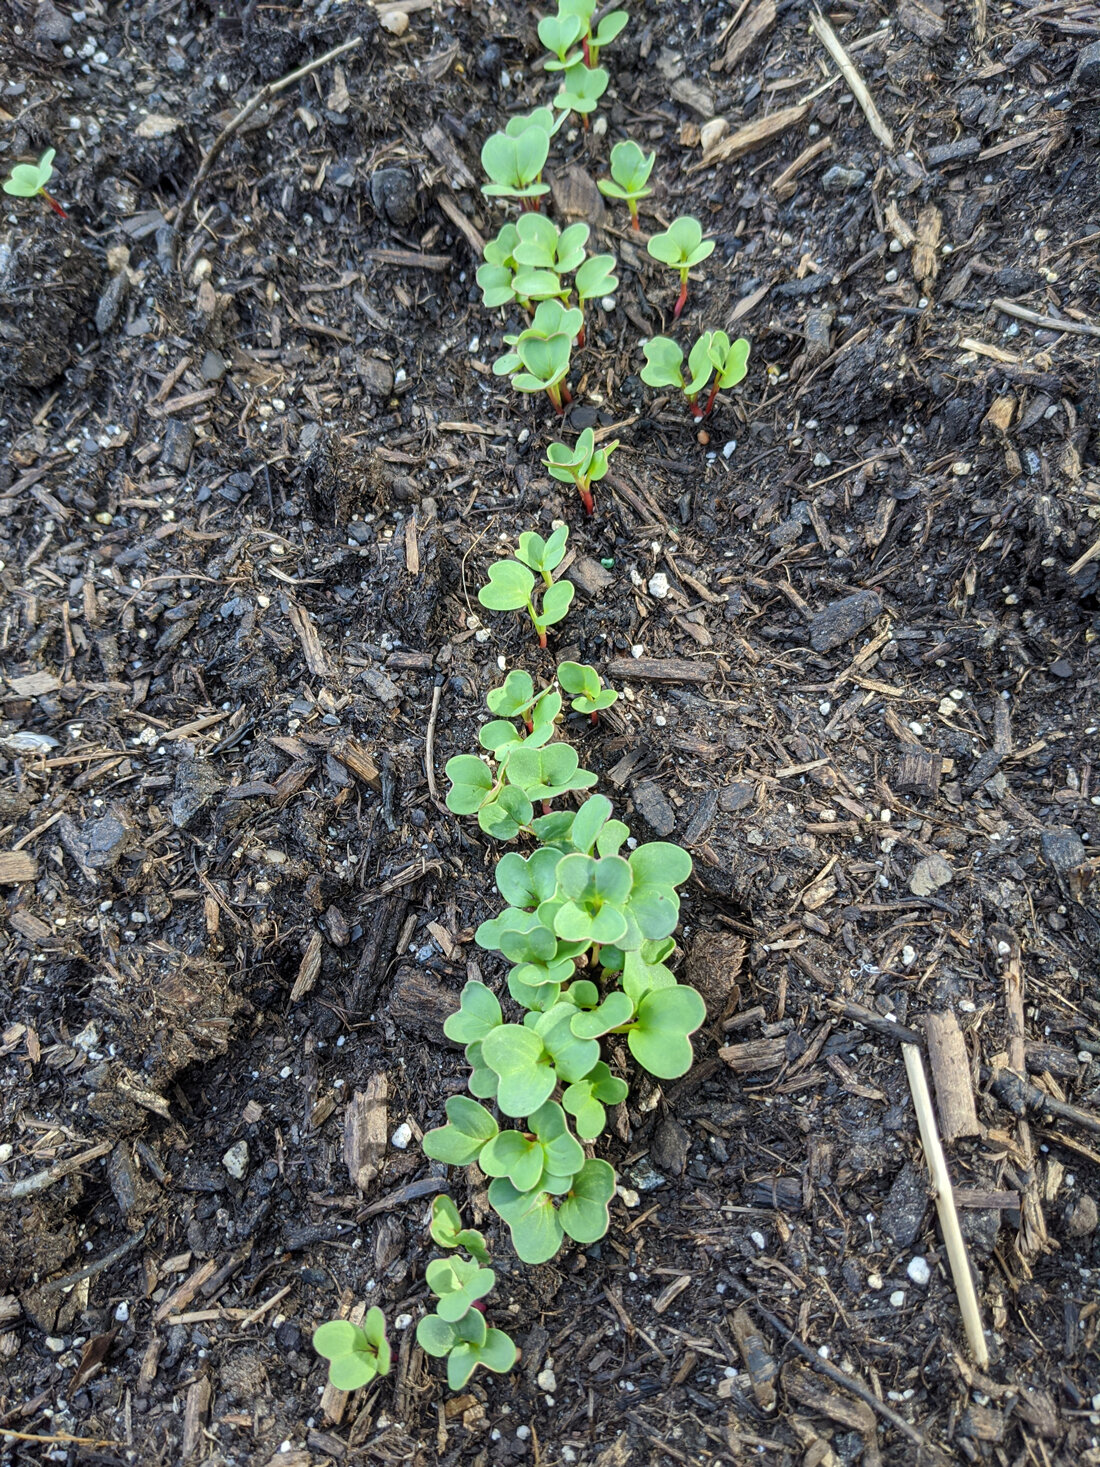 Radish sprouting from seed